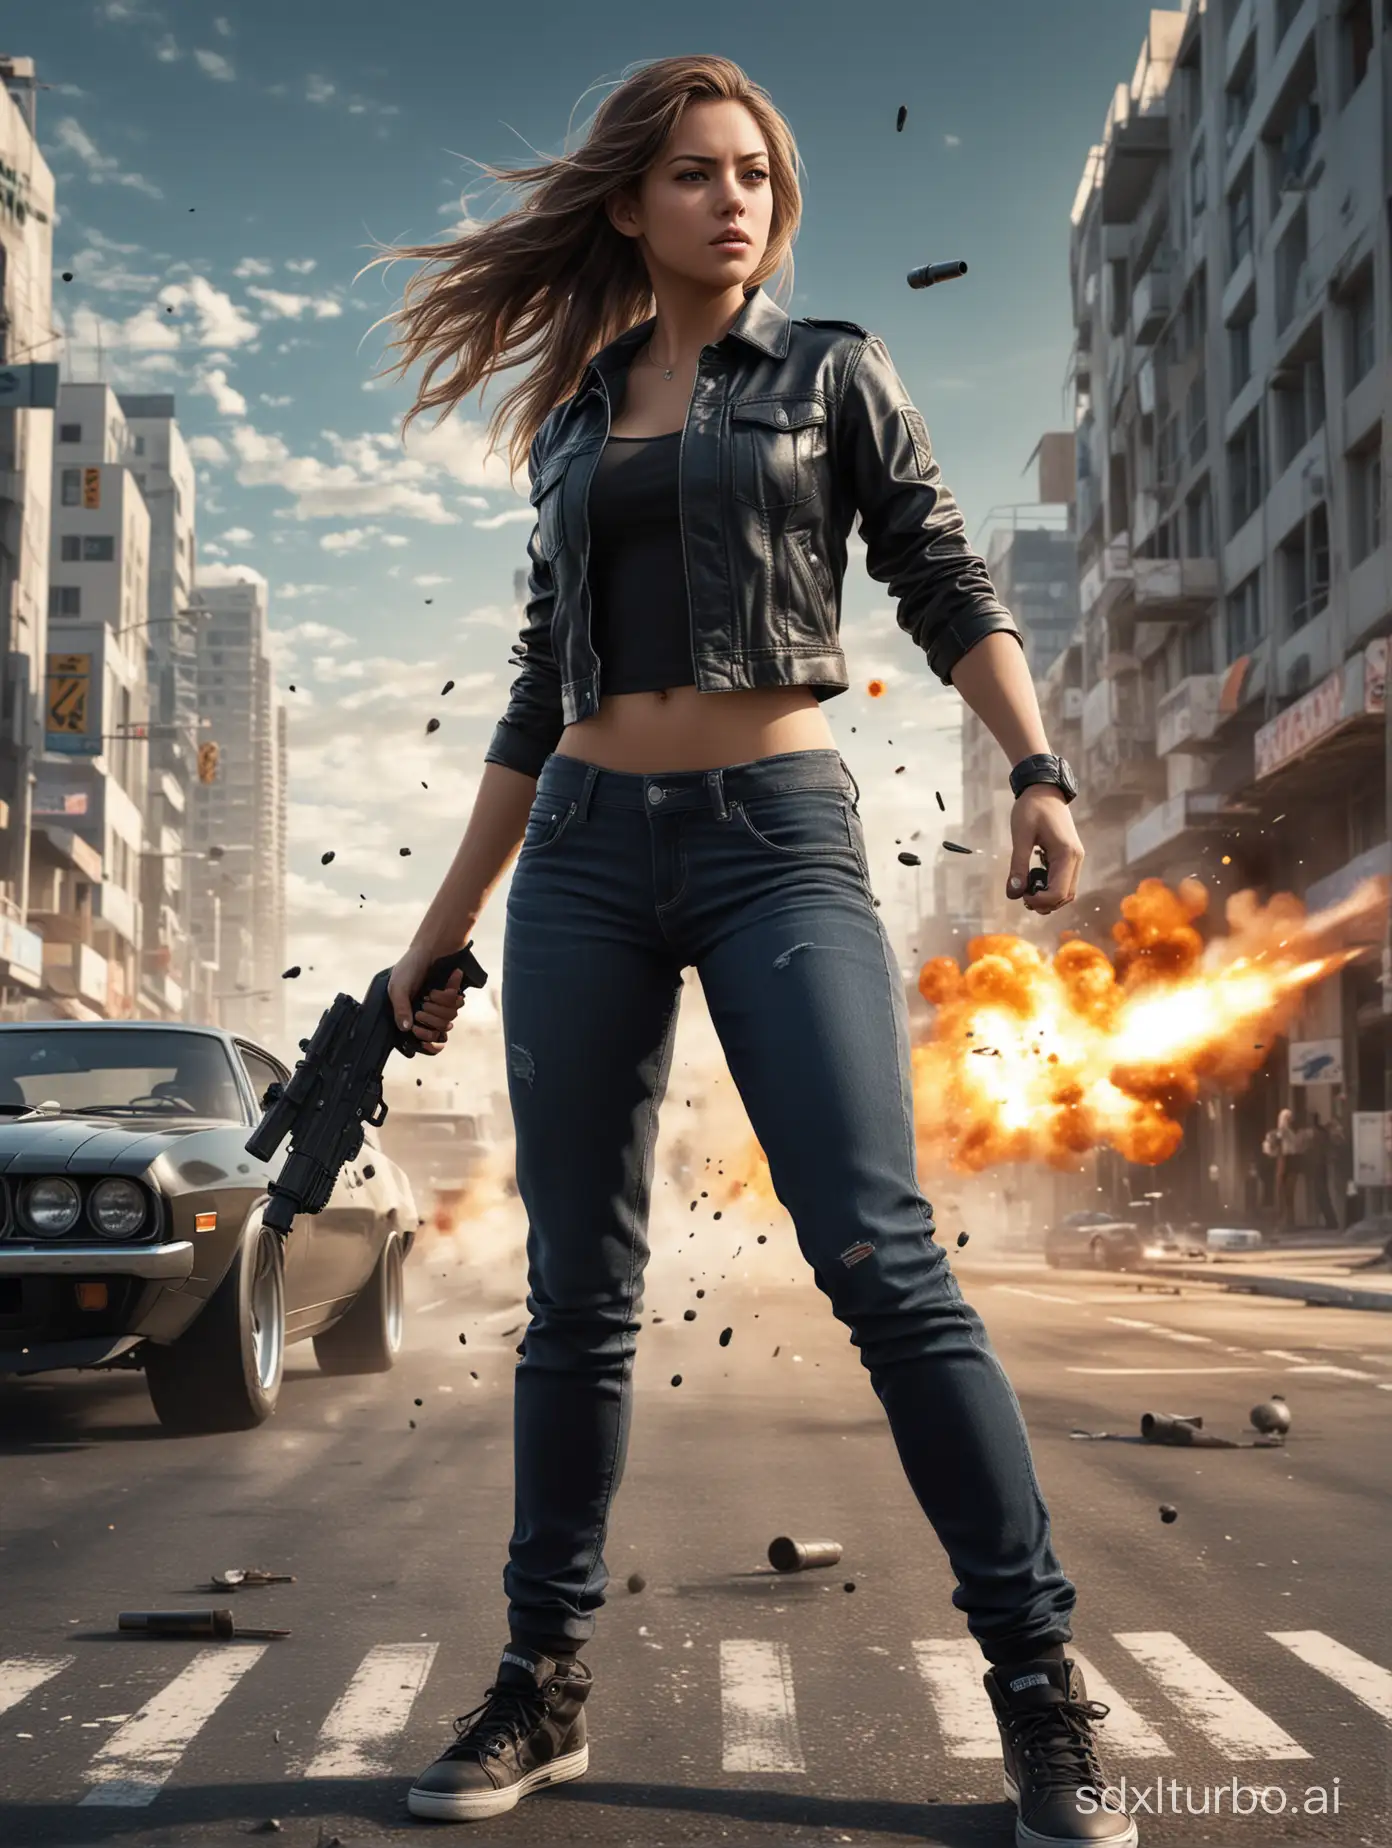 Produce an action-packed poster mirroring The Fast and the Furious style, with a rendered anime girl showcasing her full body while firing a bullet.